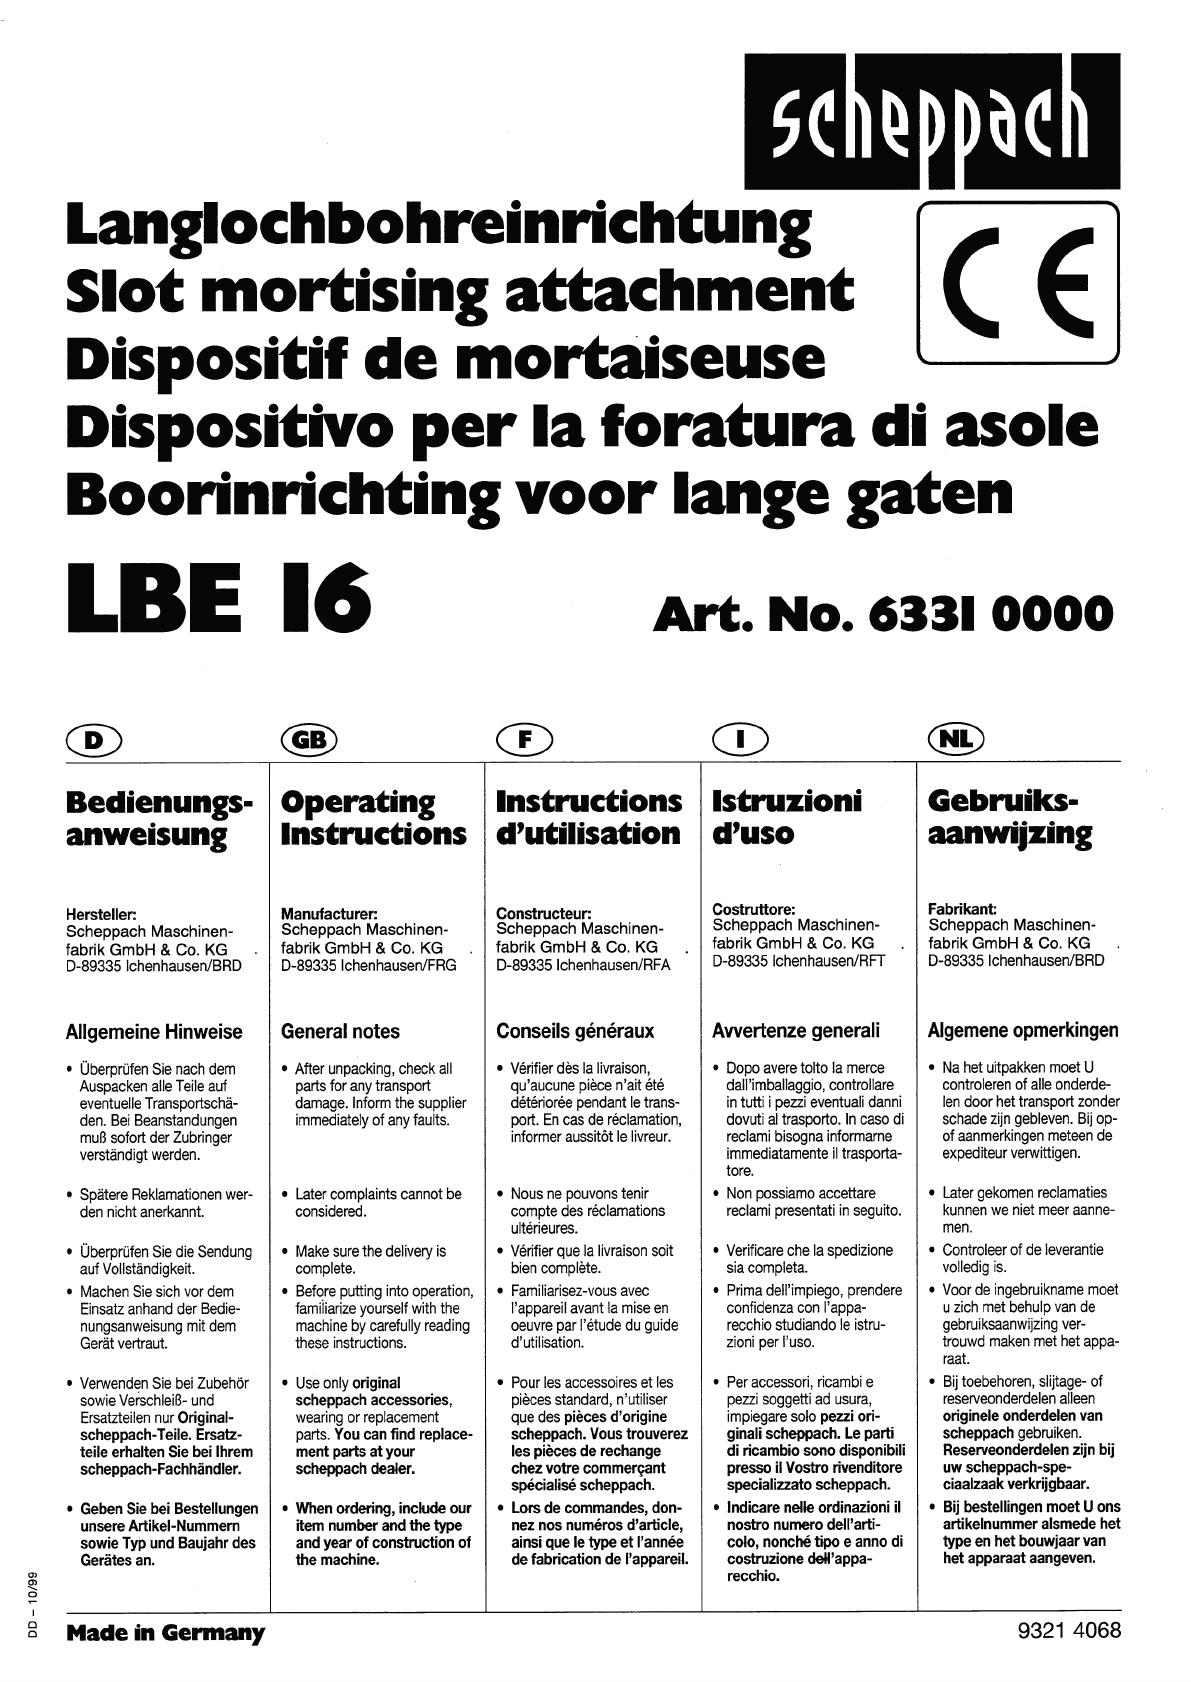 Smeltend Reserveren lied Manual Scheppach LBE16 (page 1 of 16) (English, German, Dutch, French,  Italian)